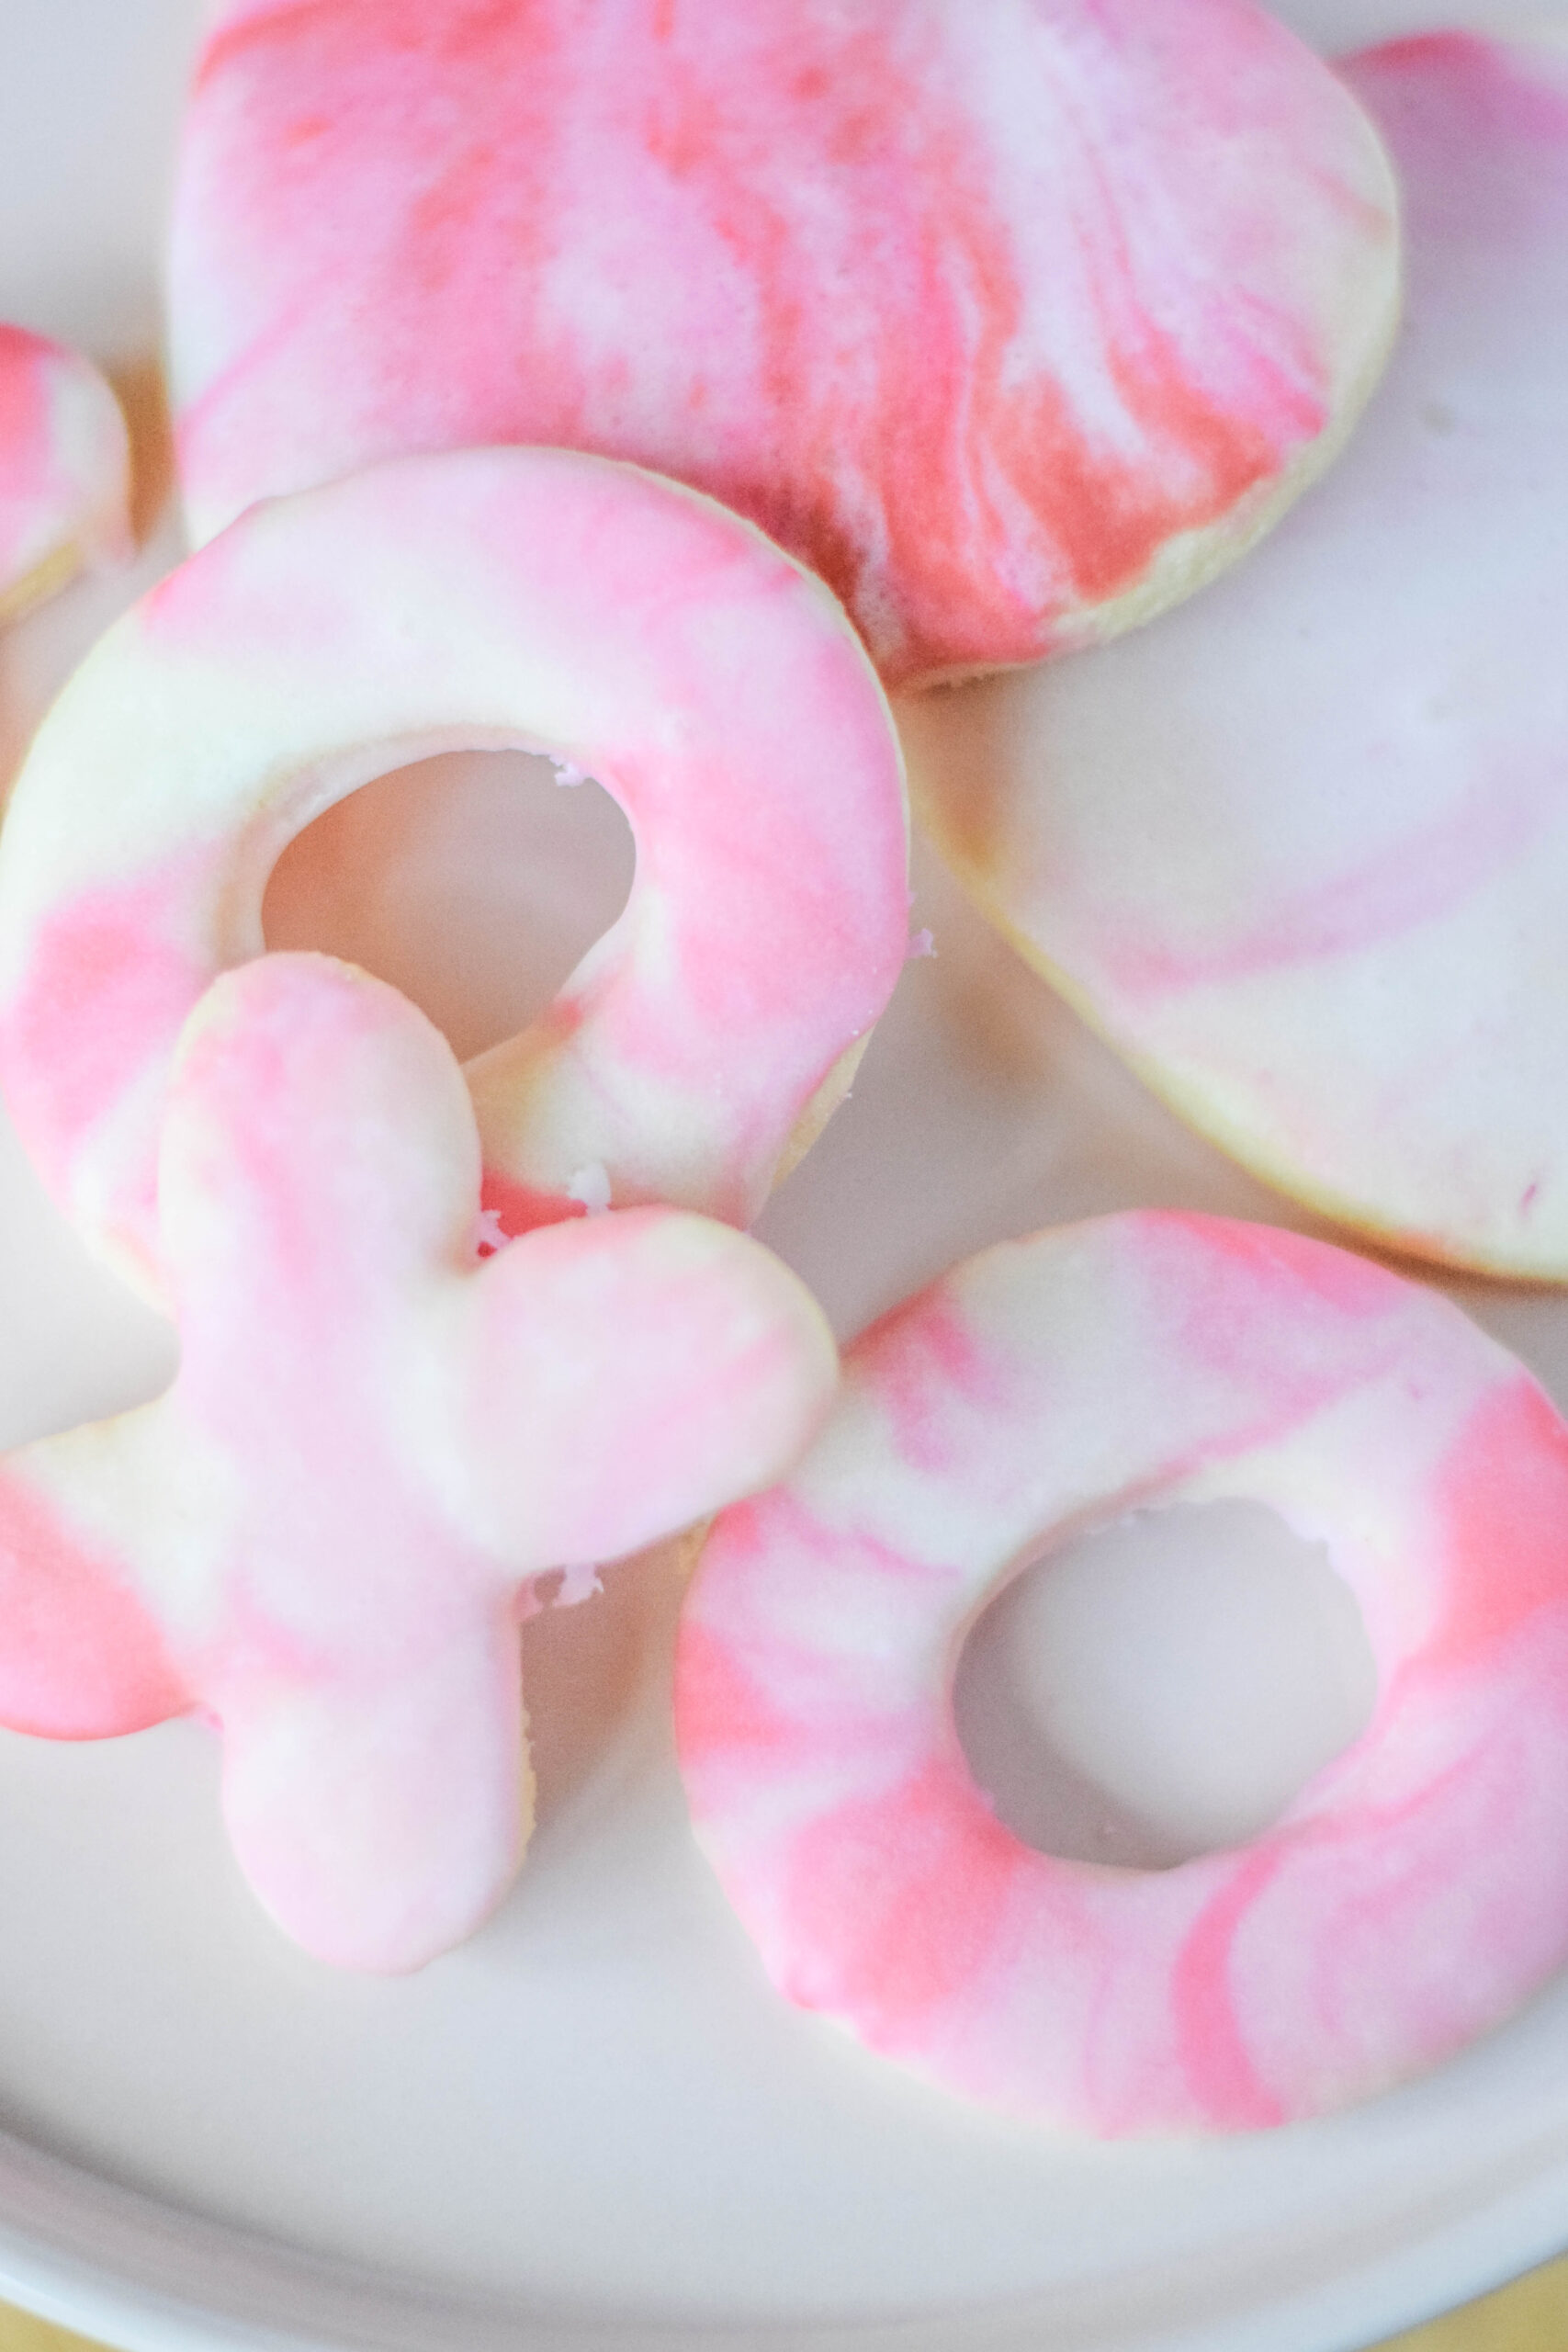 XOXO sugar cookies with red, pink, and white marble icing